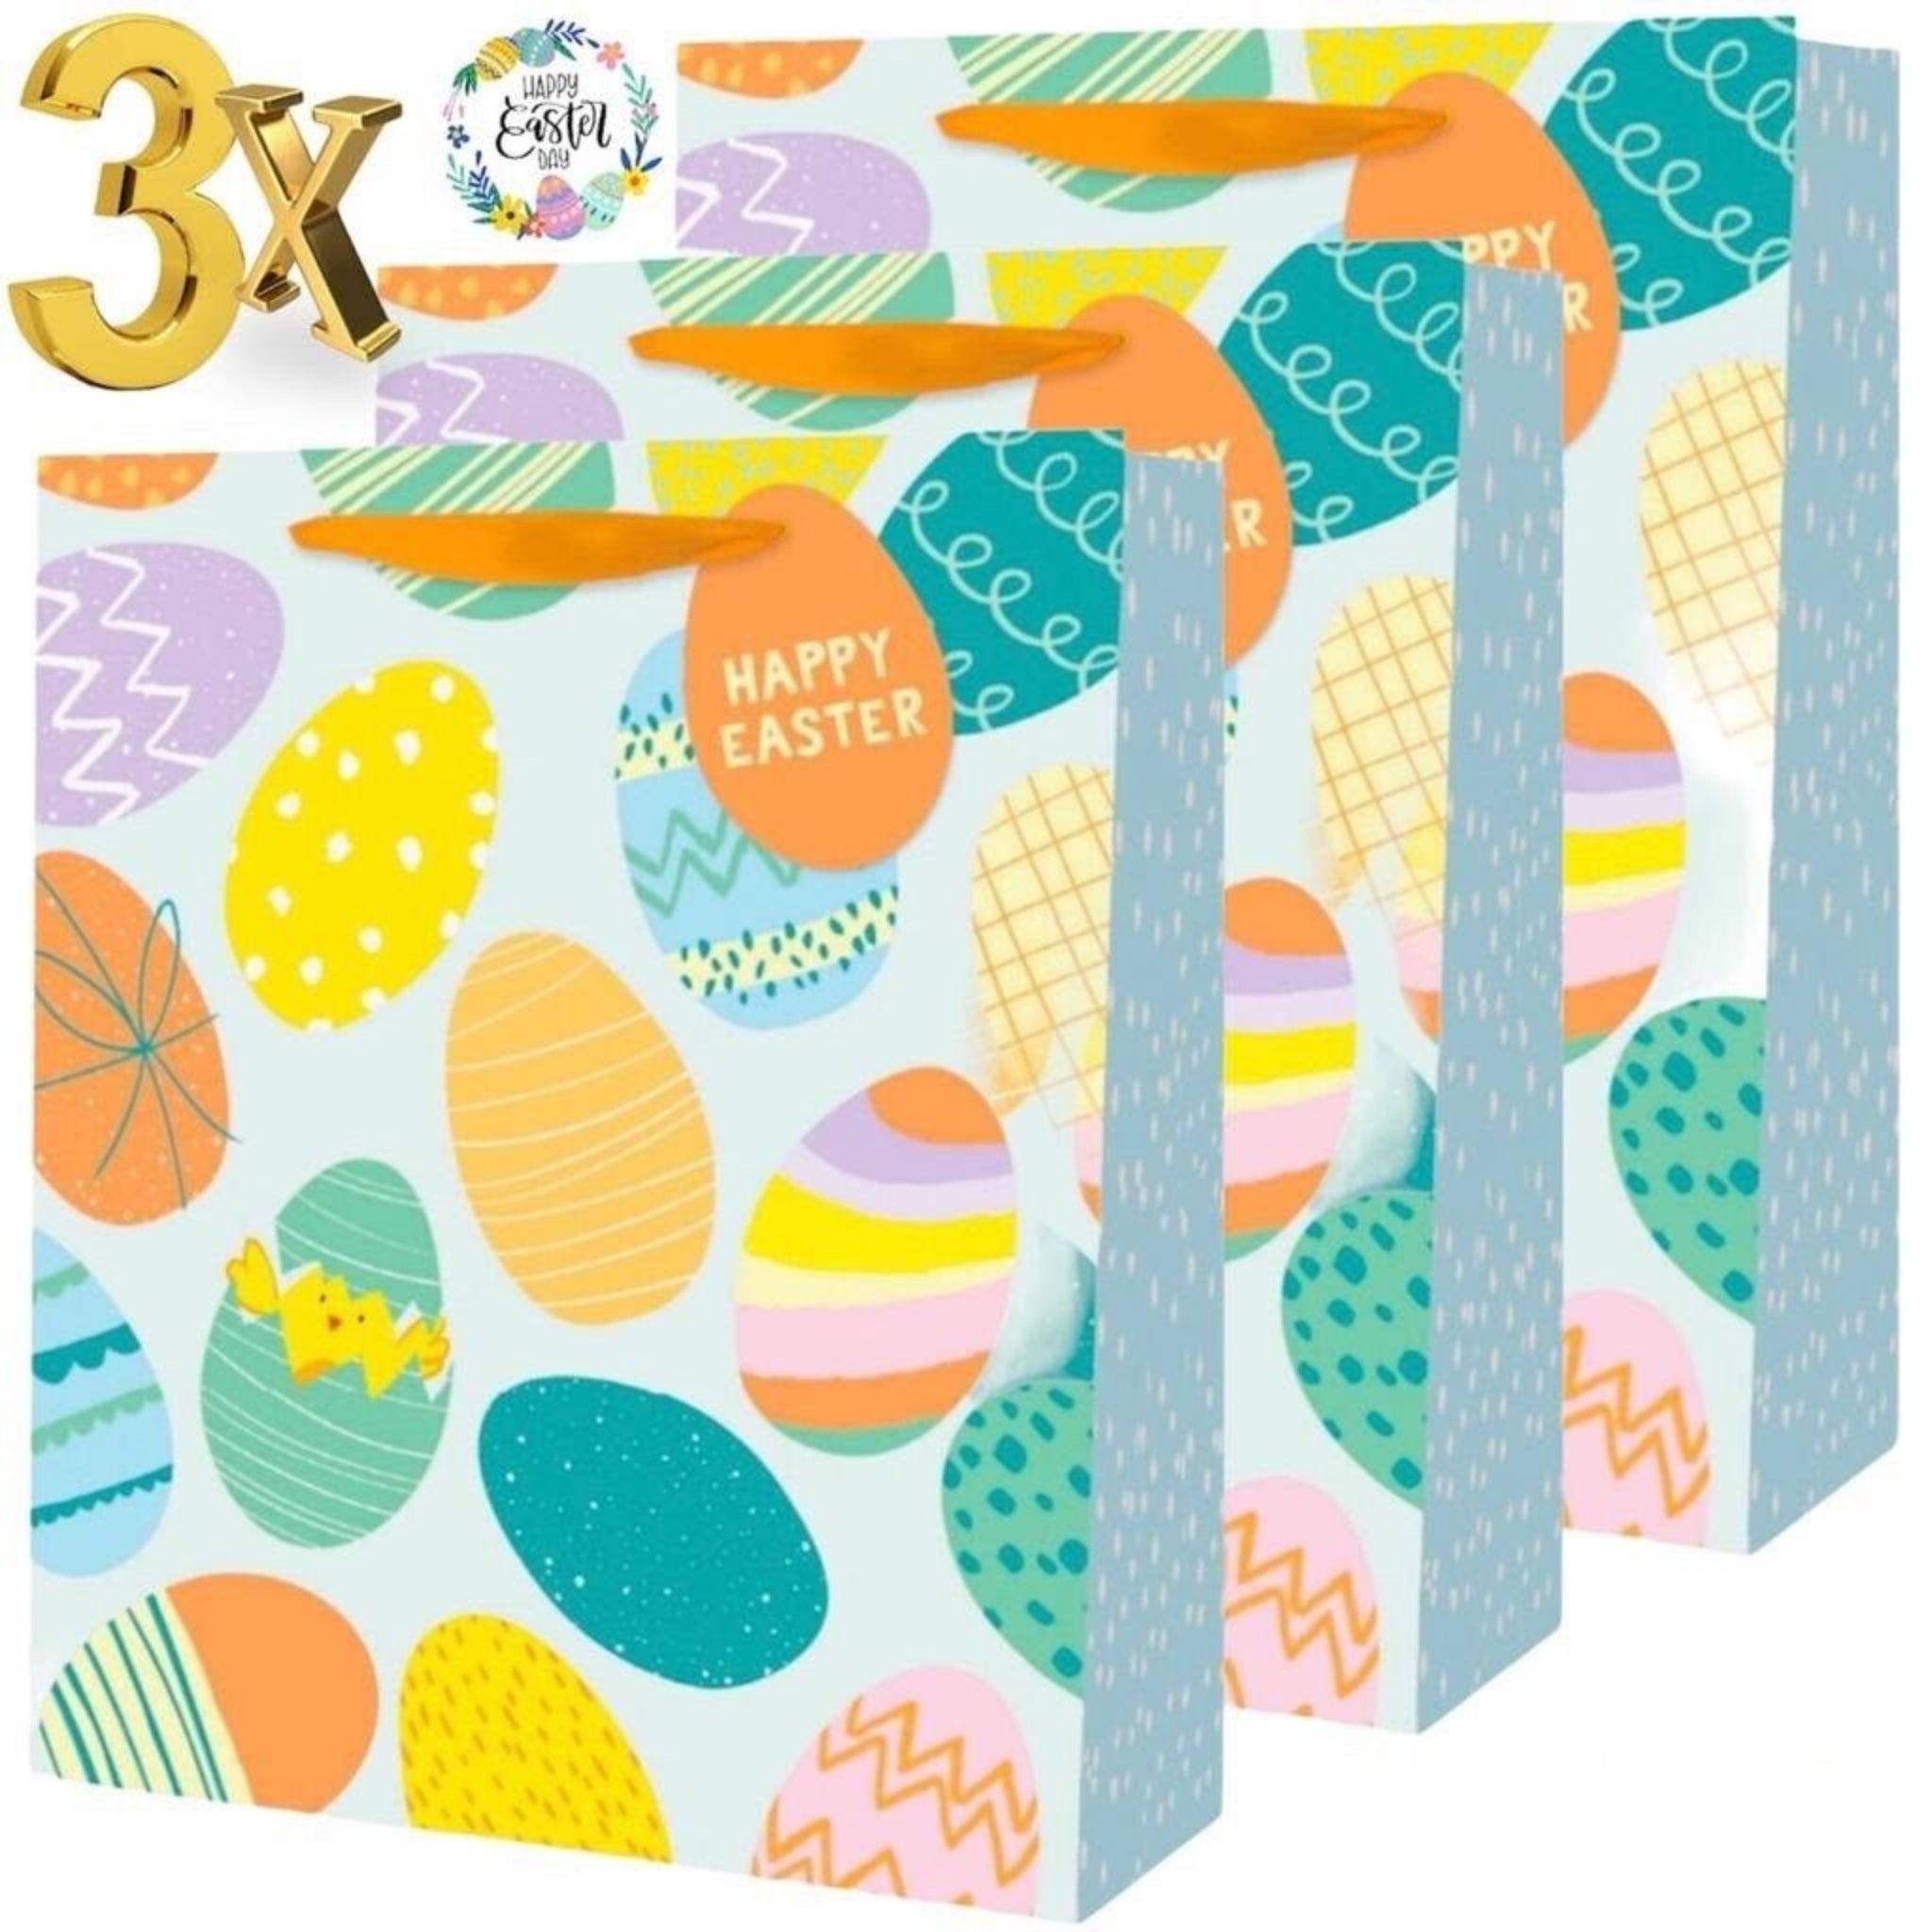 Beclen Harp 3x Easter Eggs Traditional Luxury Gift/Present Bags With ''Happy Easter'' Tags